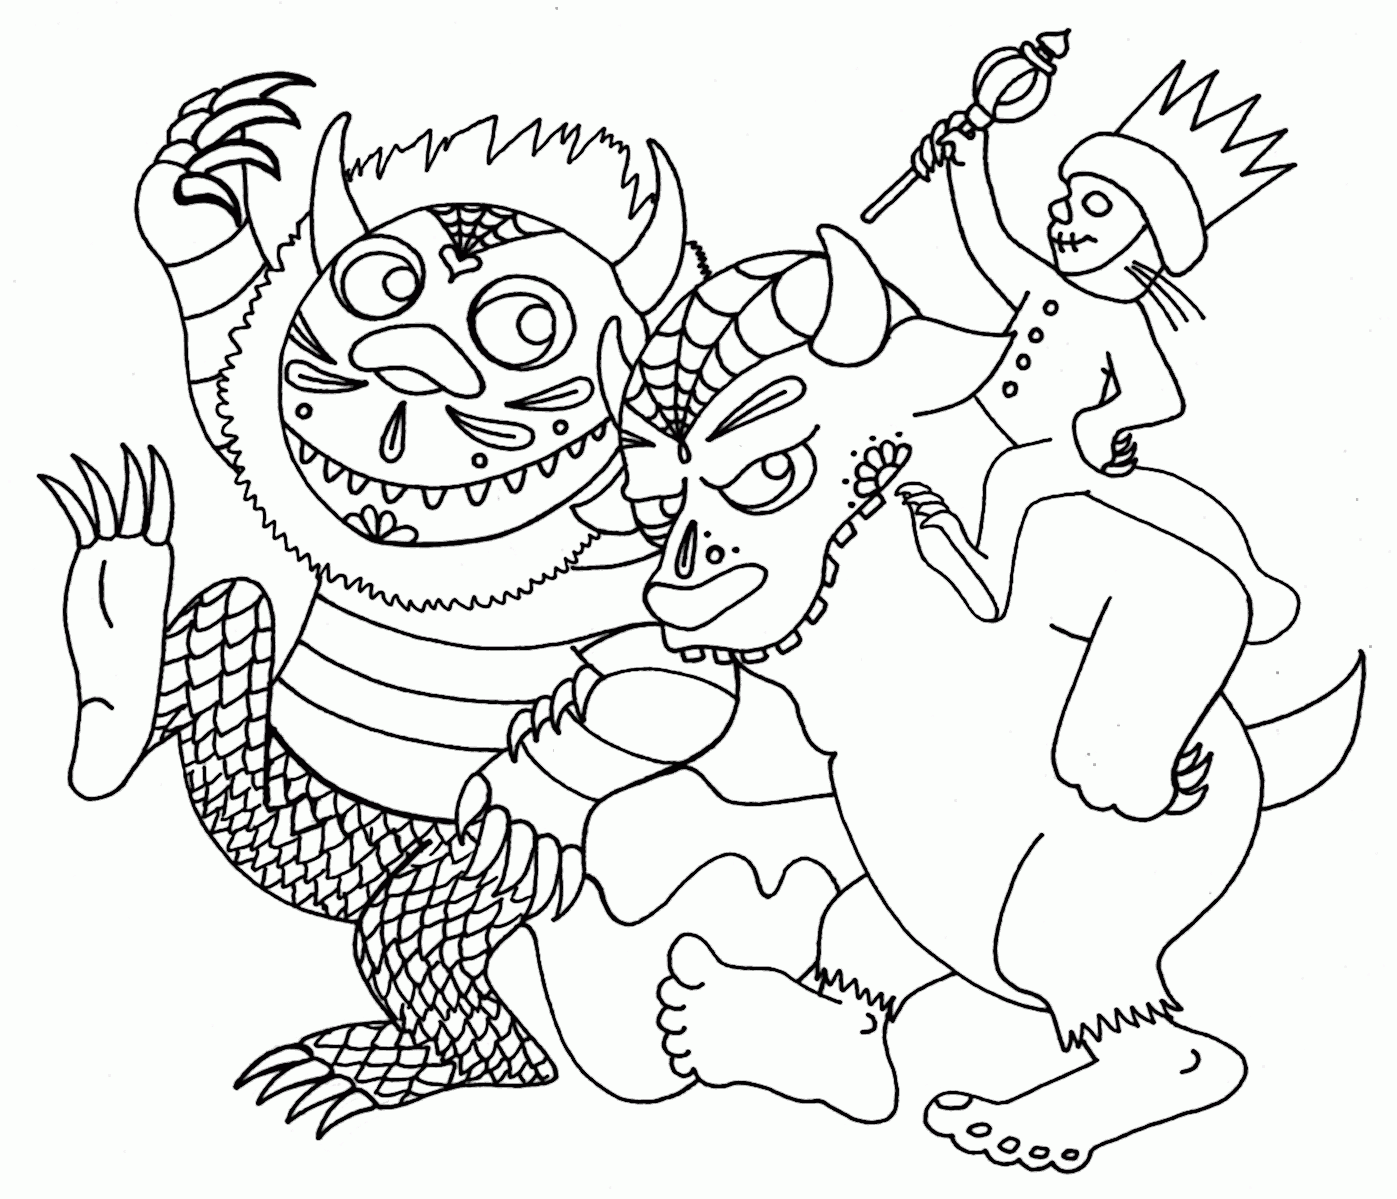 Where The Wild Things Are Coloring Pages Free